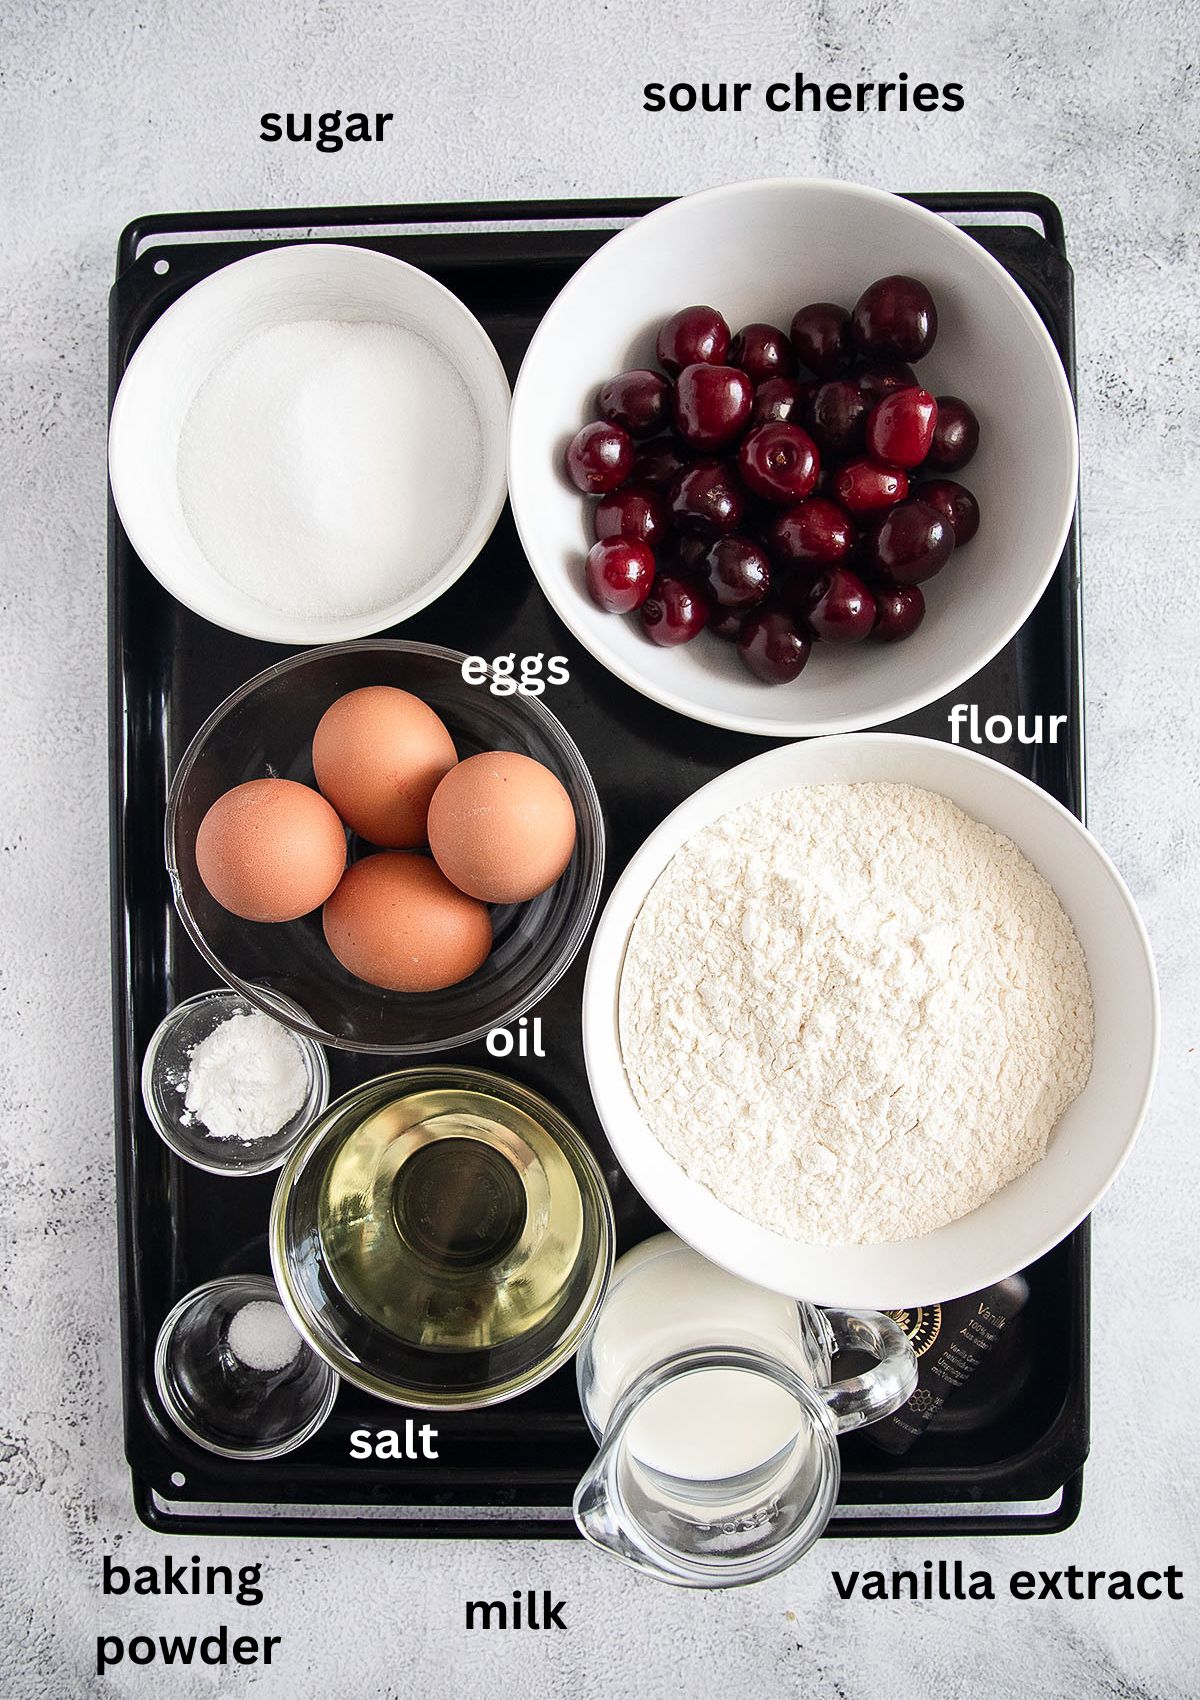 listed ingredients for cherry cake placed in bowls on a large baking tray.